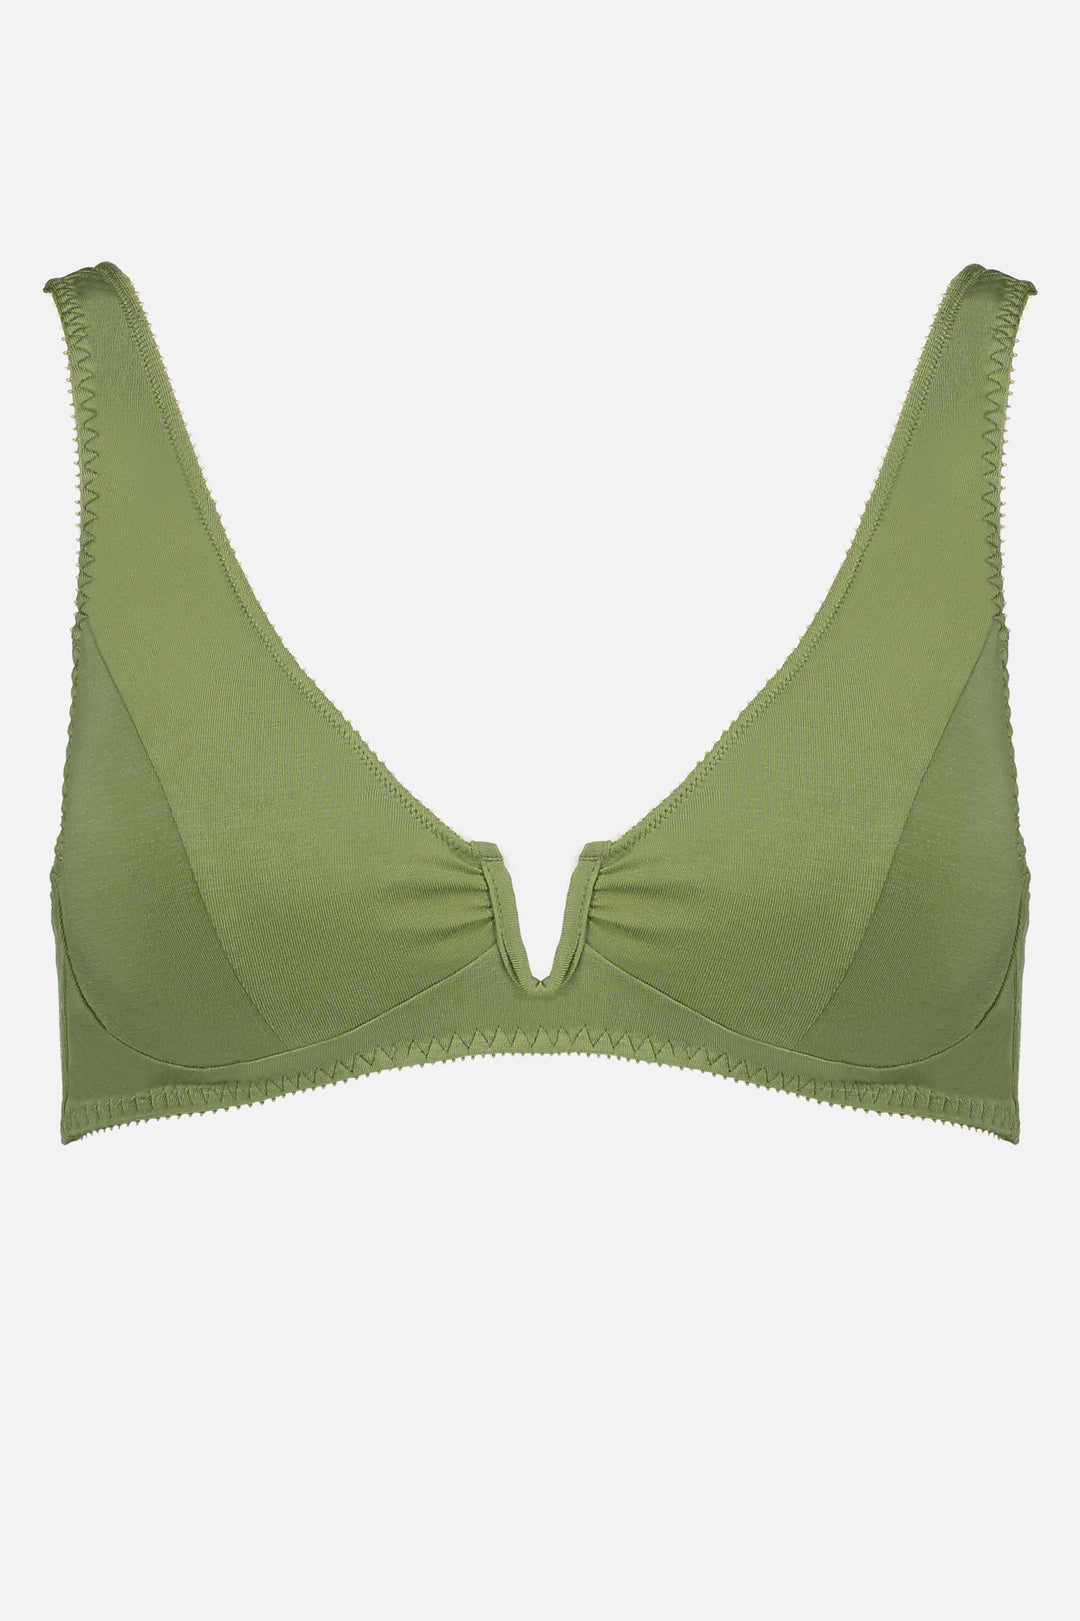 Videris Lingerie Sarah underwire free soft cup bra in olive embroidered TENCEL™ with a scooped plunge cup and front U wire